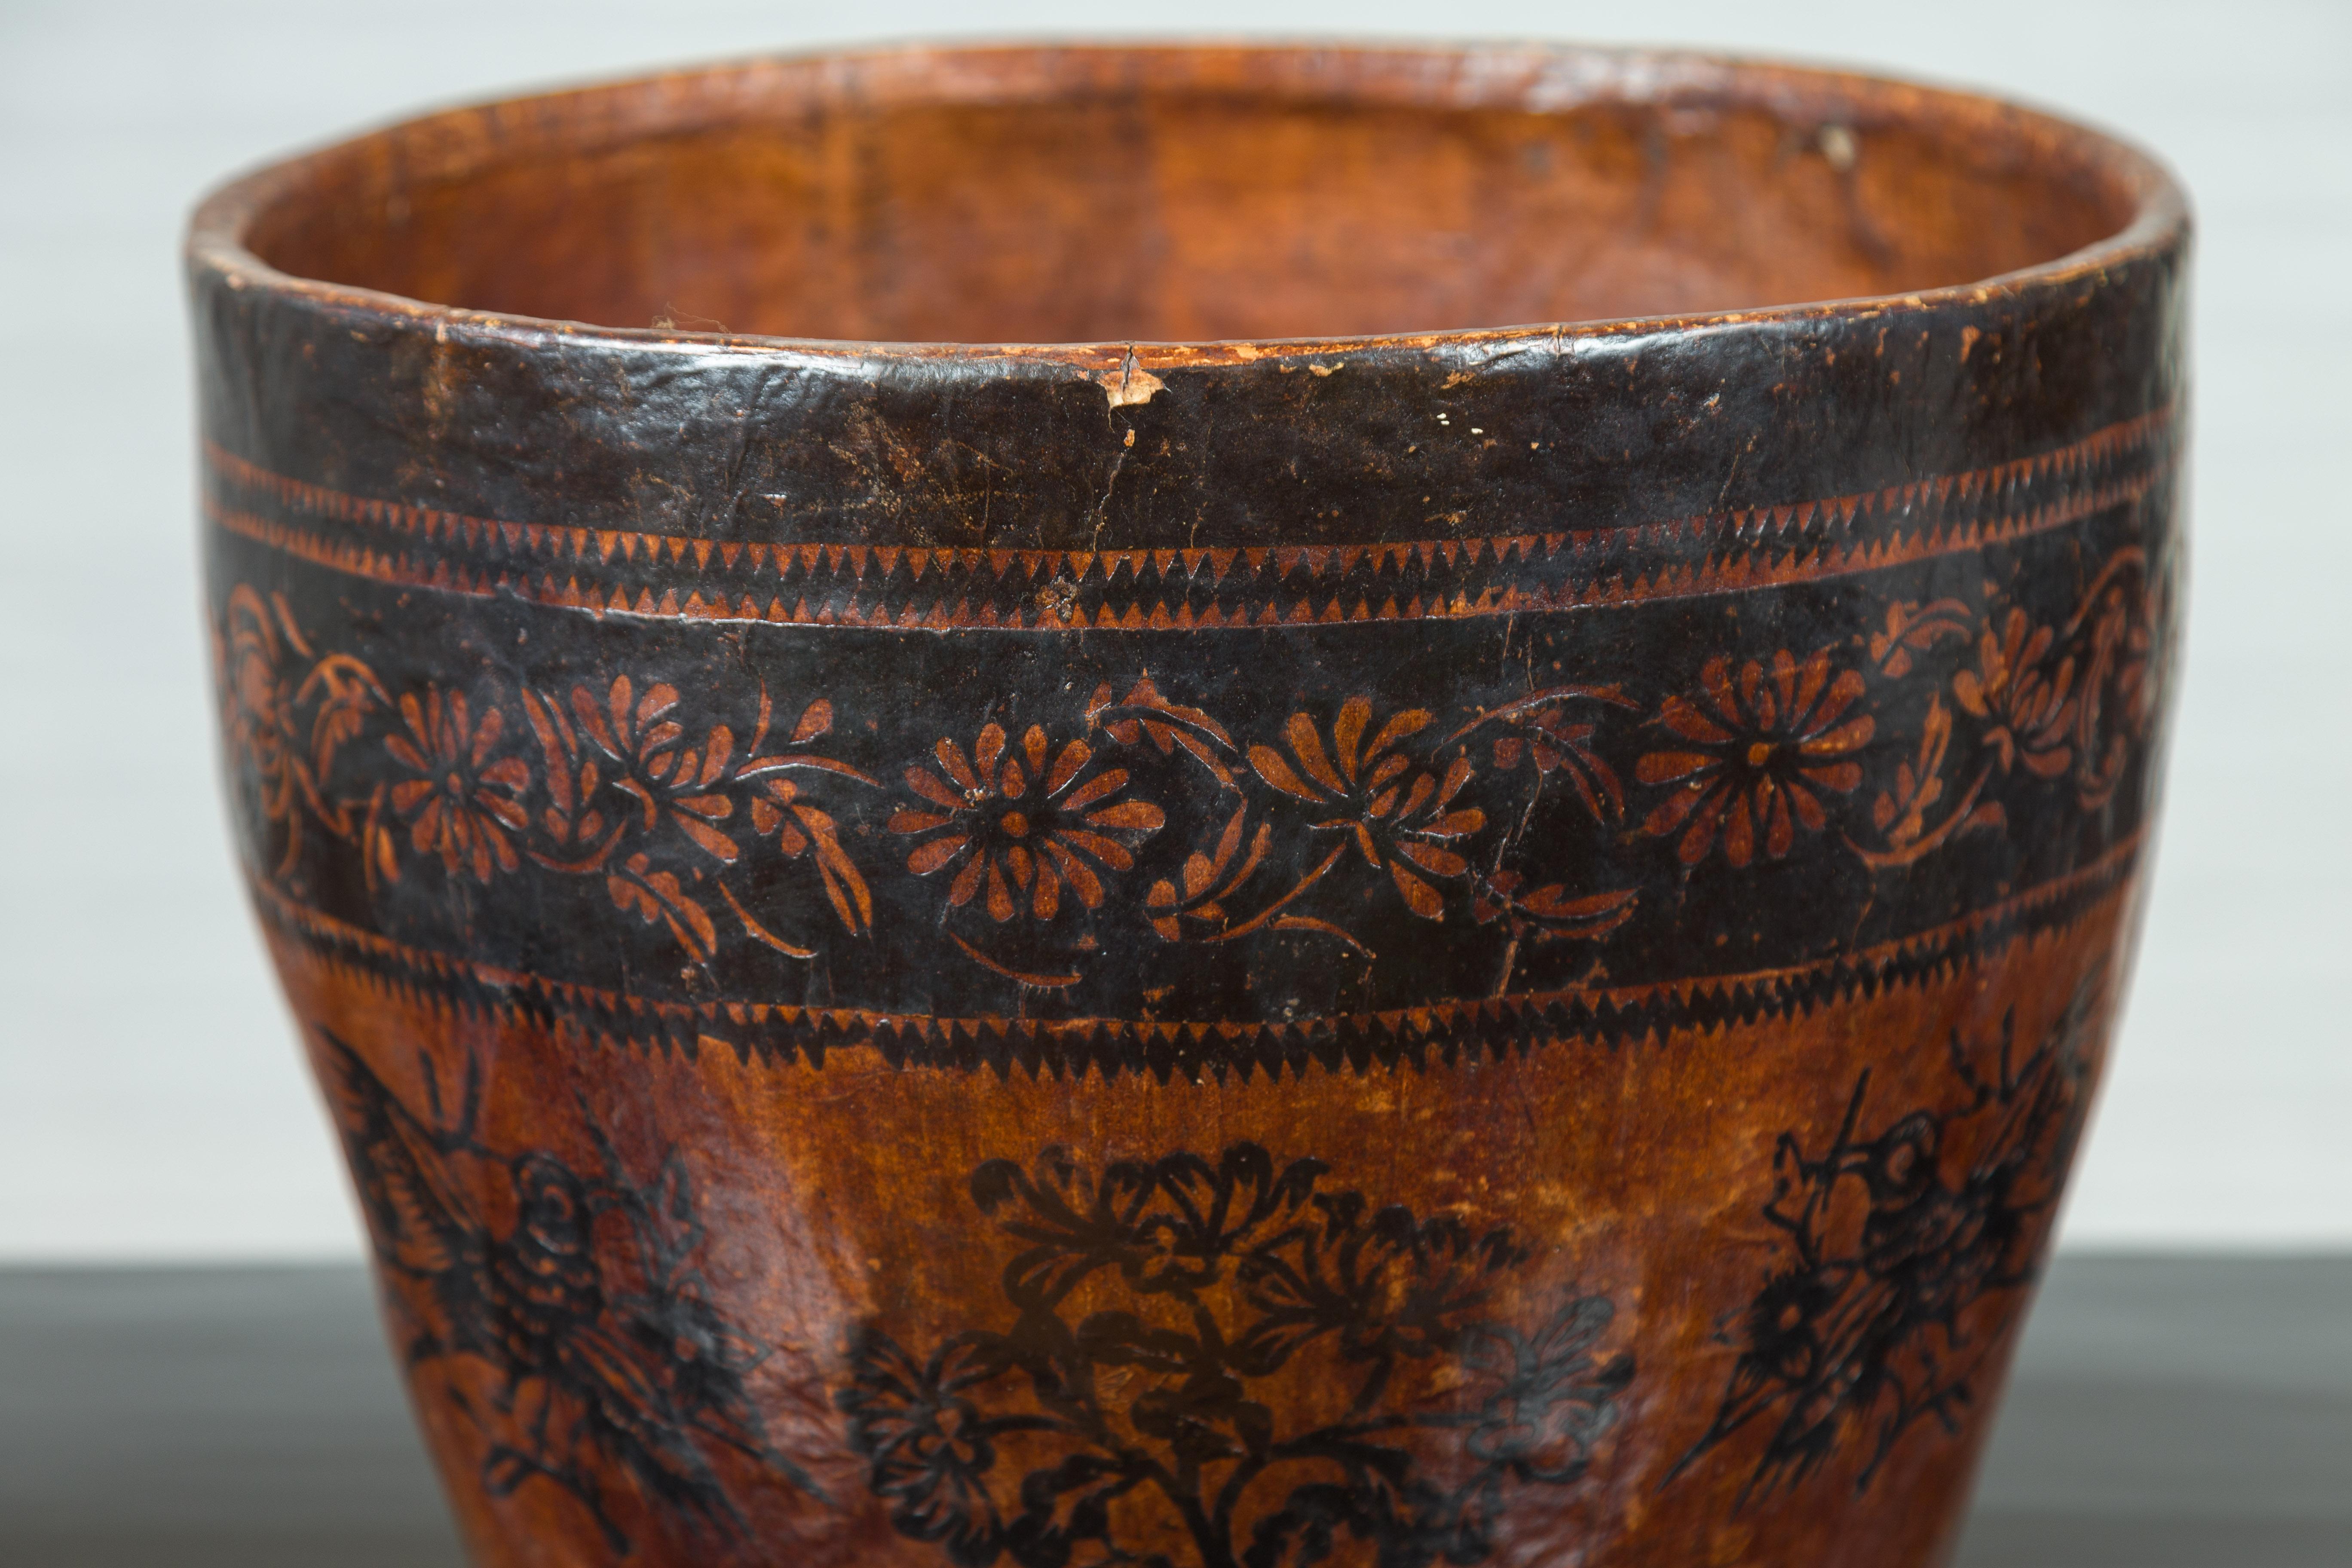 Lacquered Chinese Brown and Black Papier-Mâché Basket with Floral Frieze and Bird Motifs